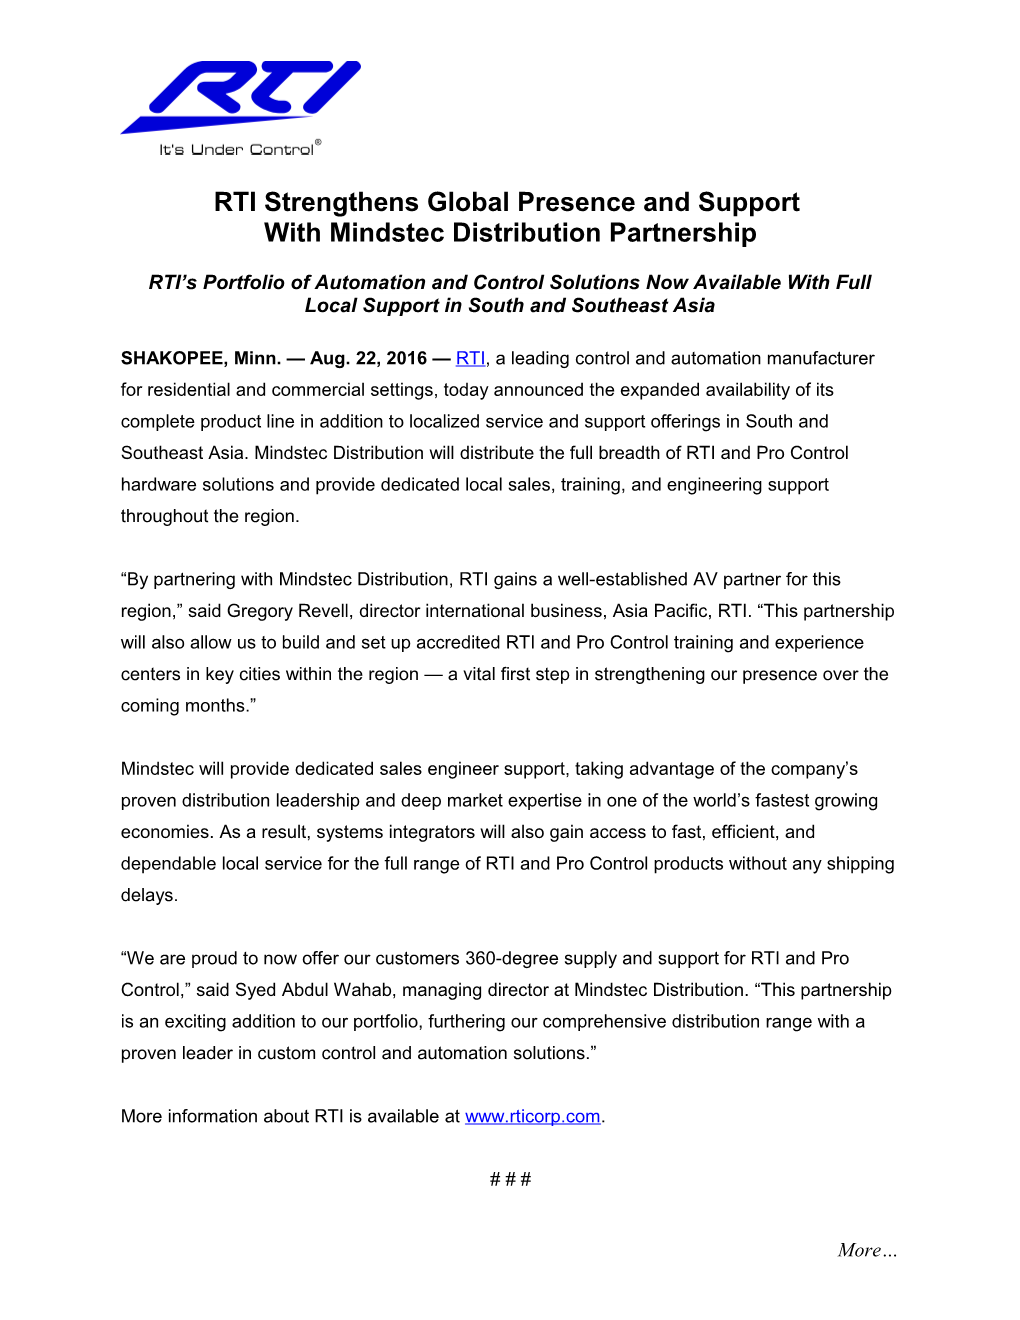 RTI Strengthens Global Presence and Support